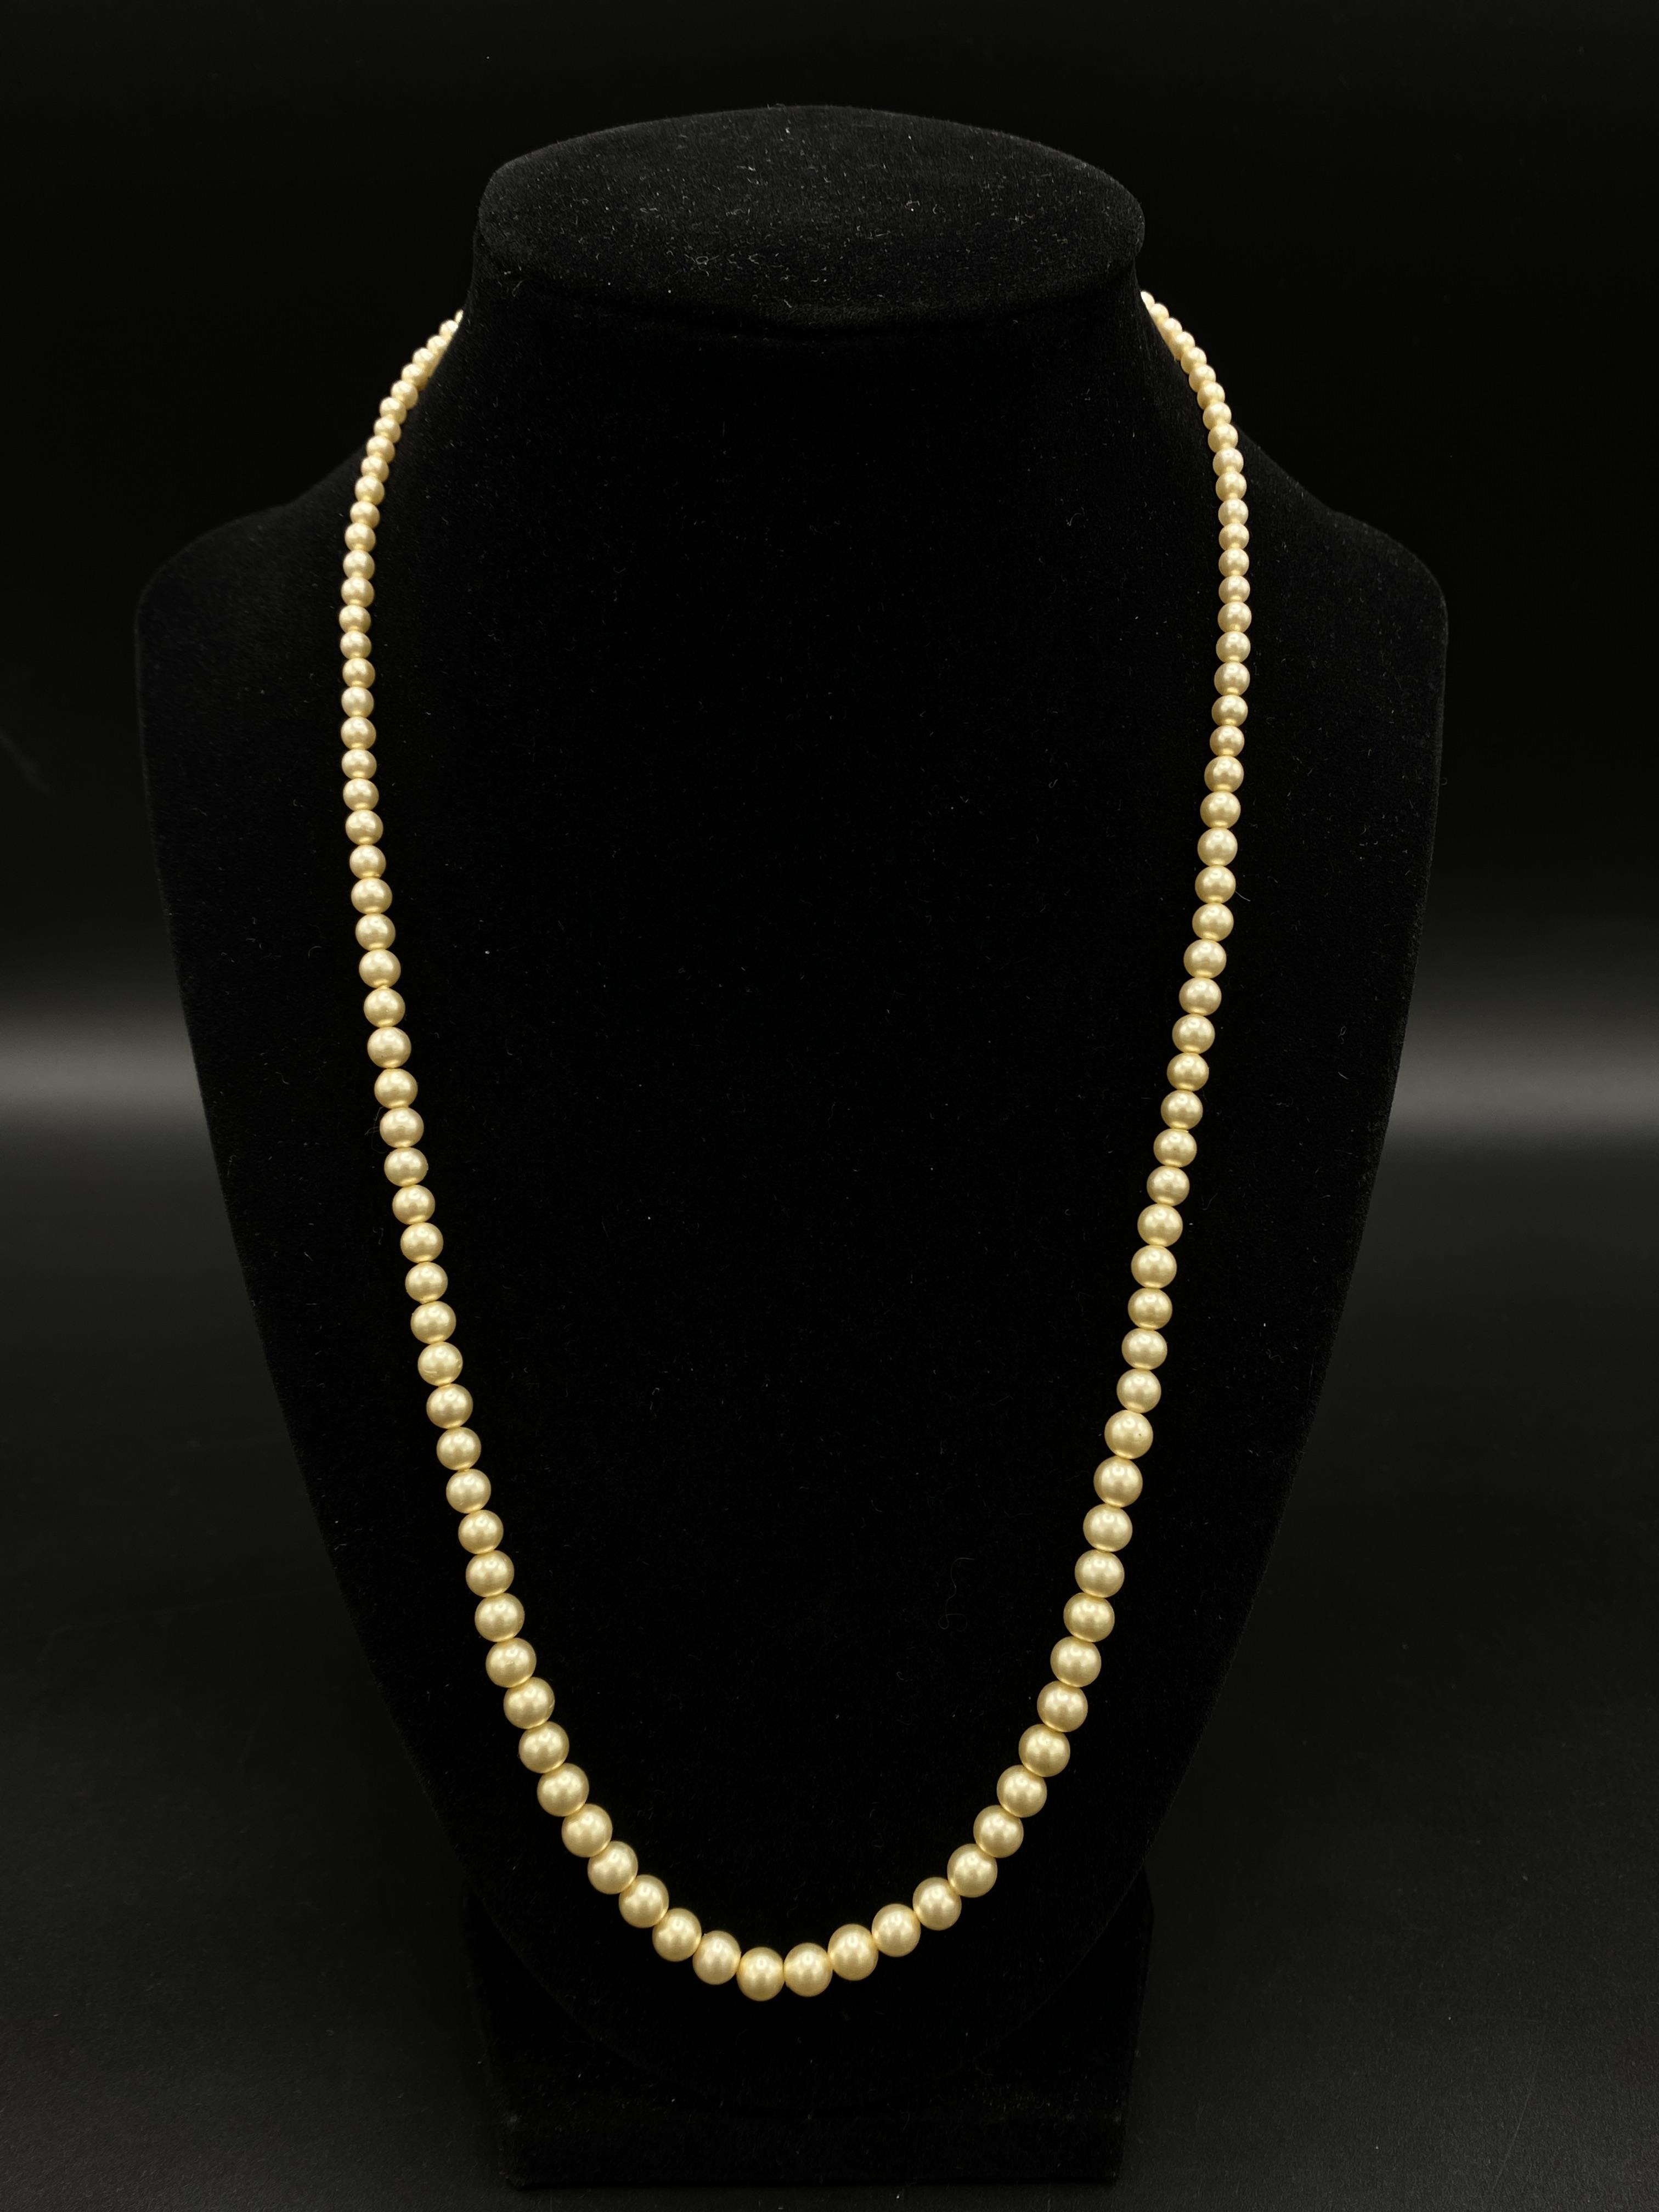 Two pearl necklaces with gold clasps - Image 4 of 9